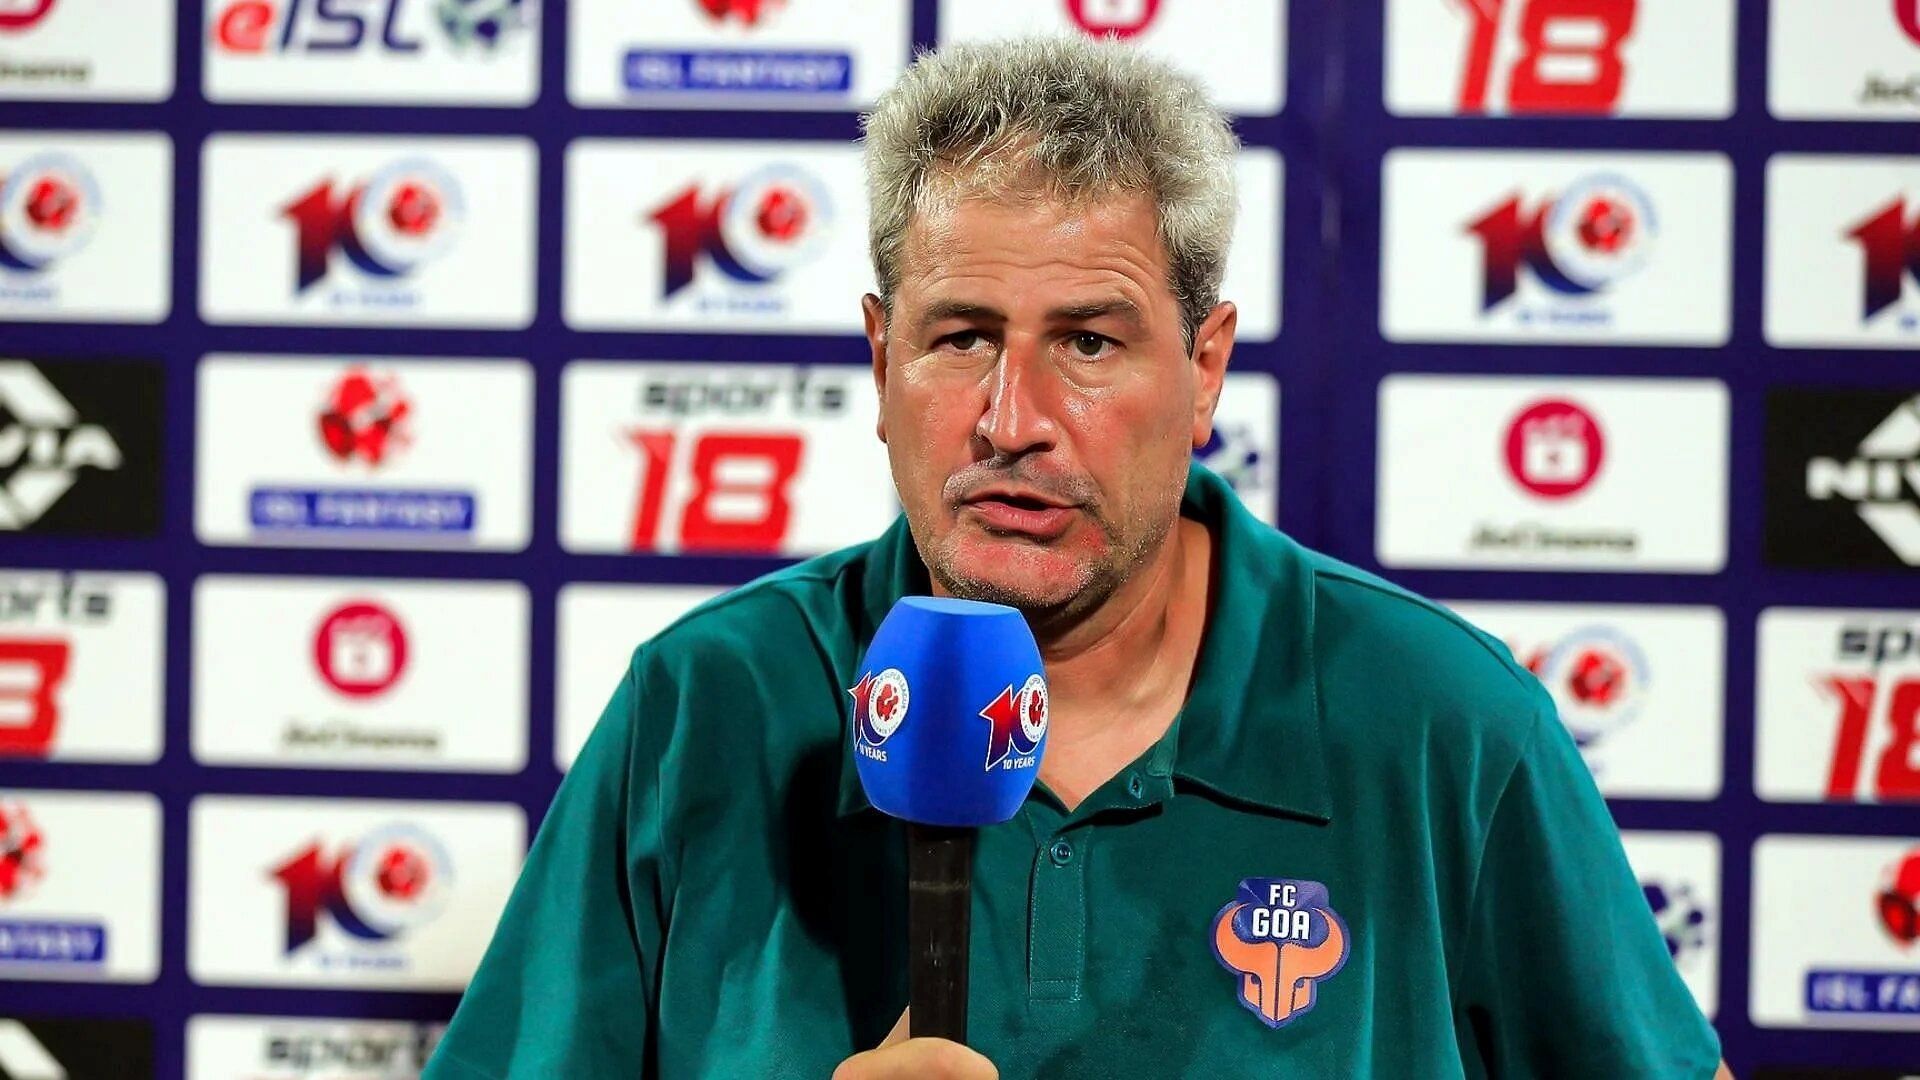 FC Goa head coach Manolo Marque has stated that his team is focused and motivated to win the first-ever ISL cup title for the club